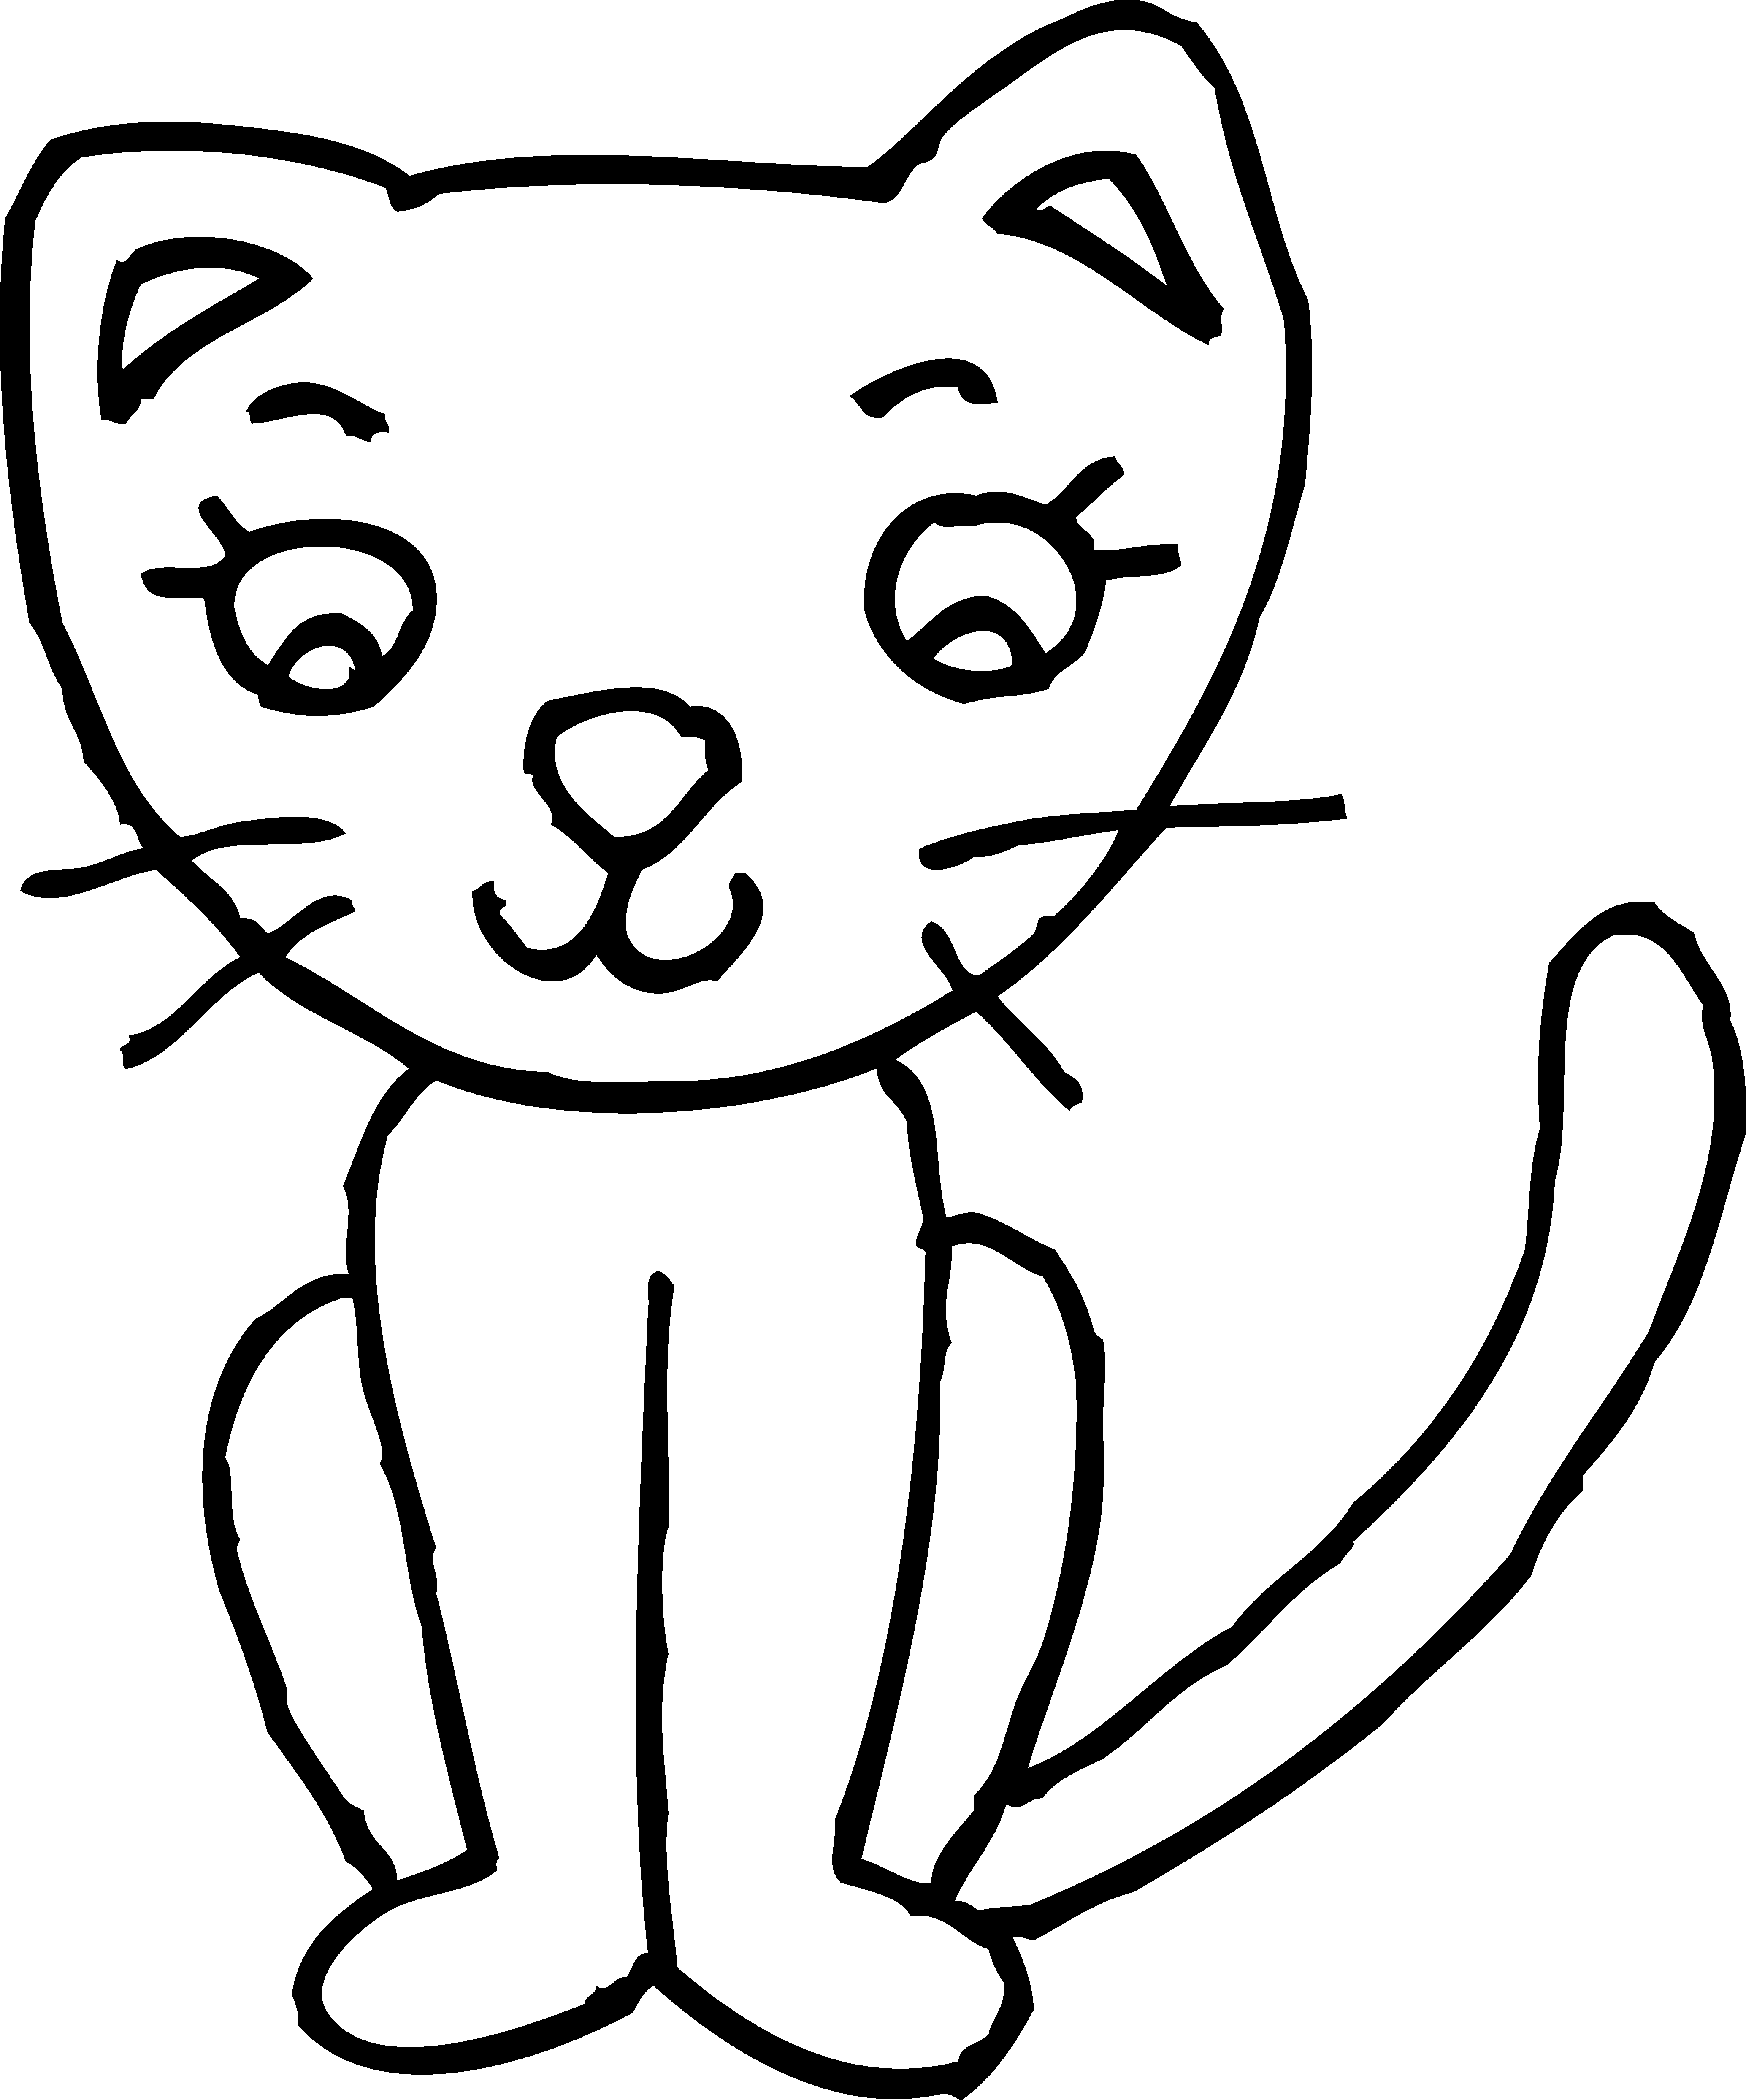 Cat Clip Art Black And White | Clipart library - Free Clipart Images